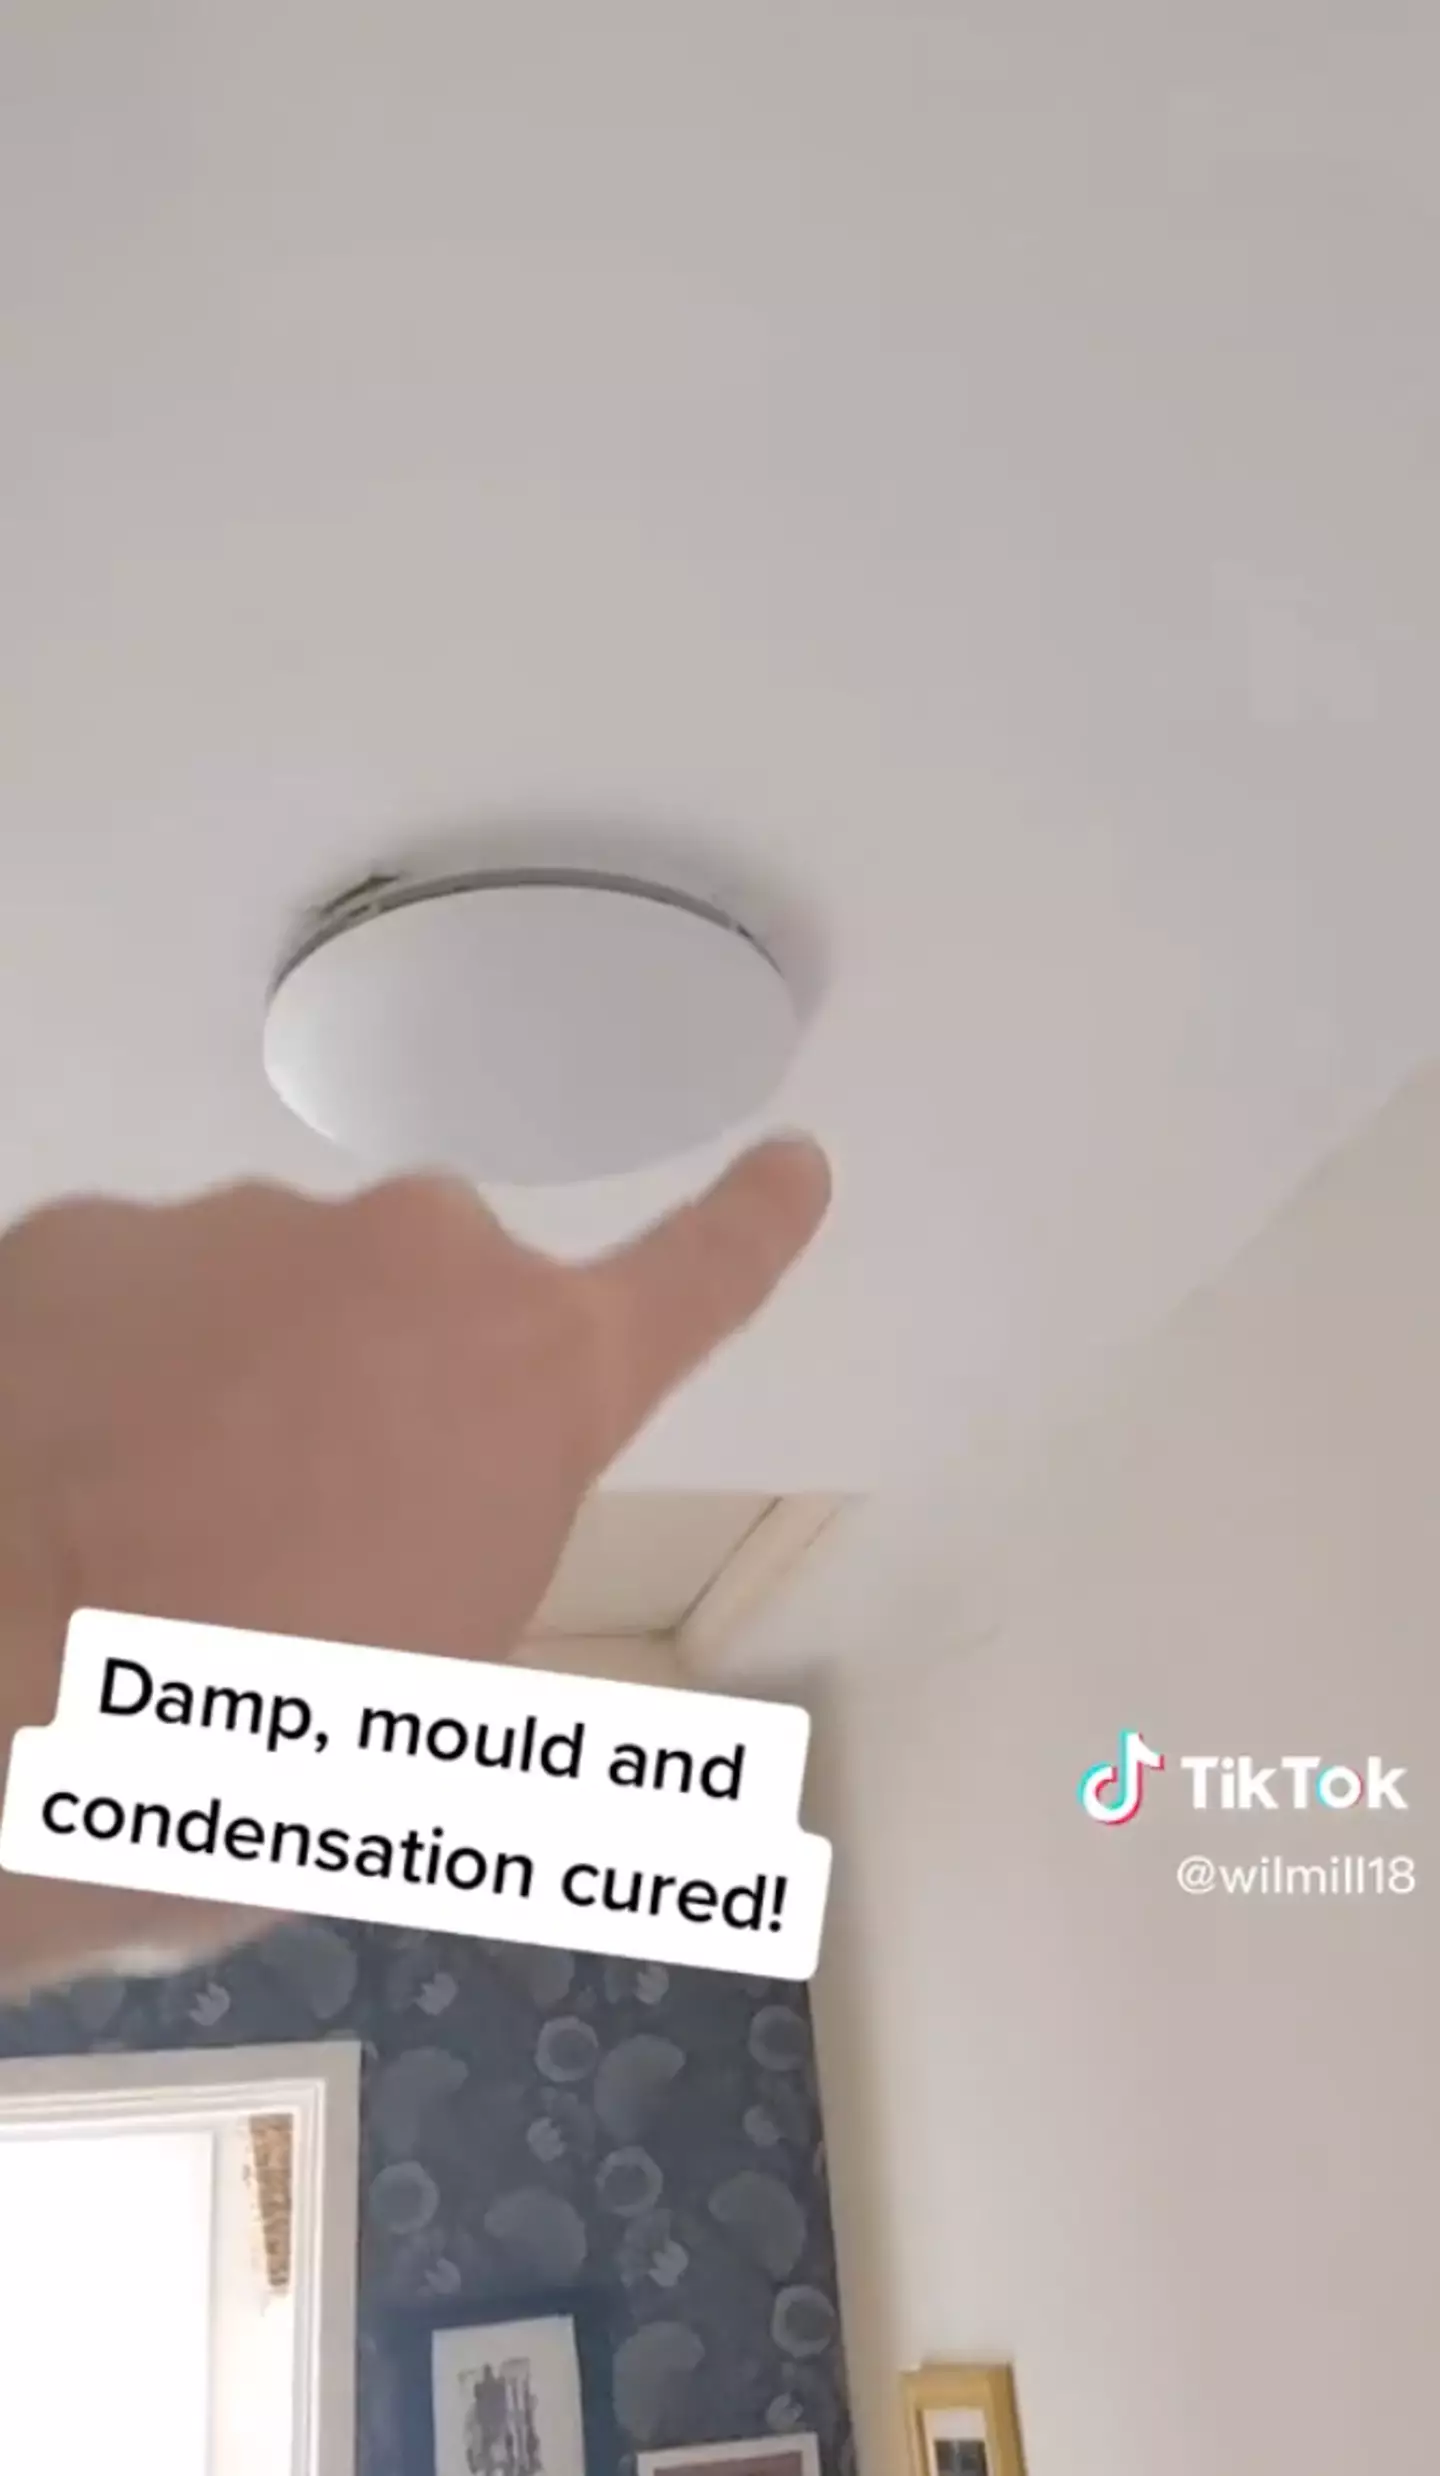 The TikToker shared how he managed to stop the mould and damp.